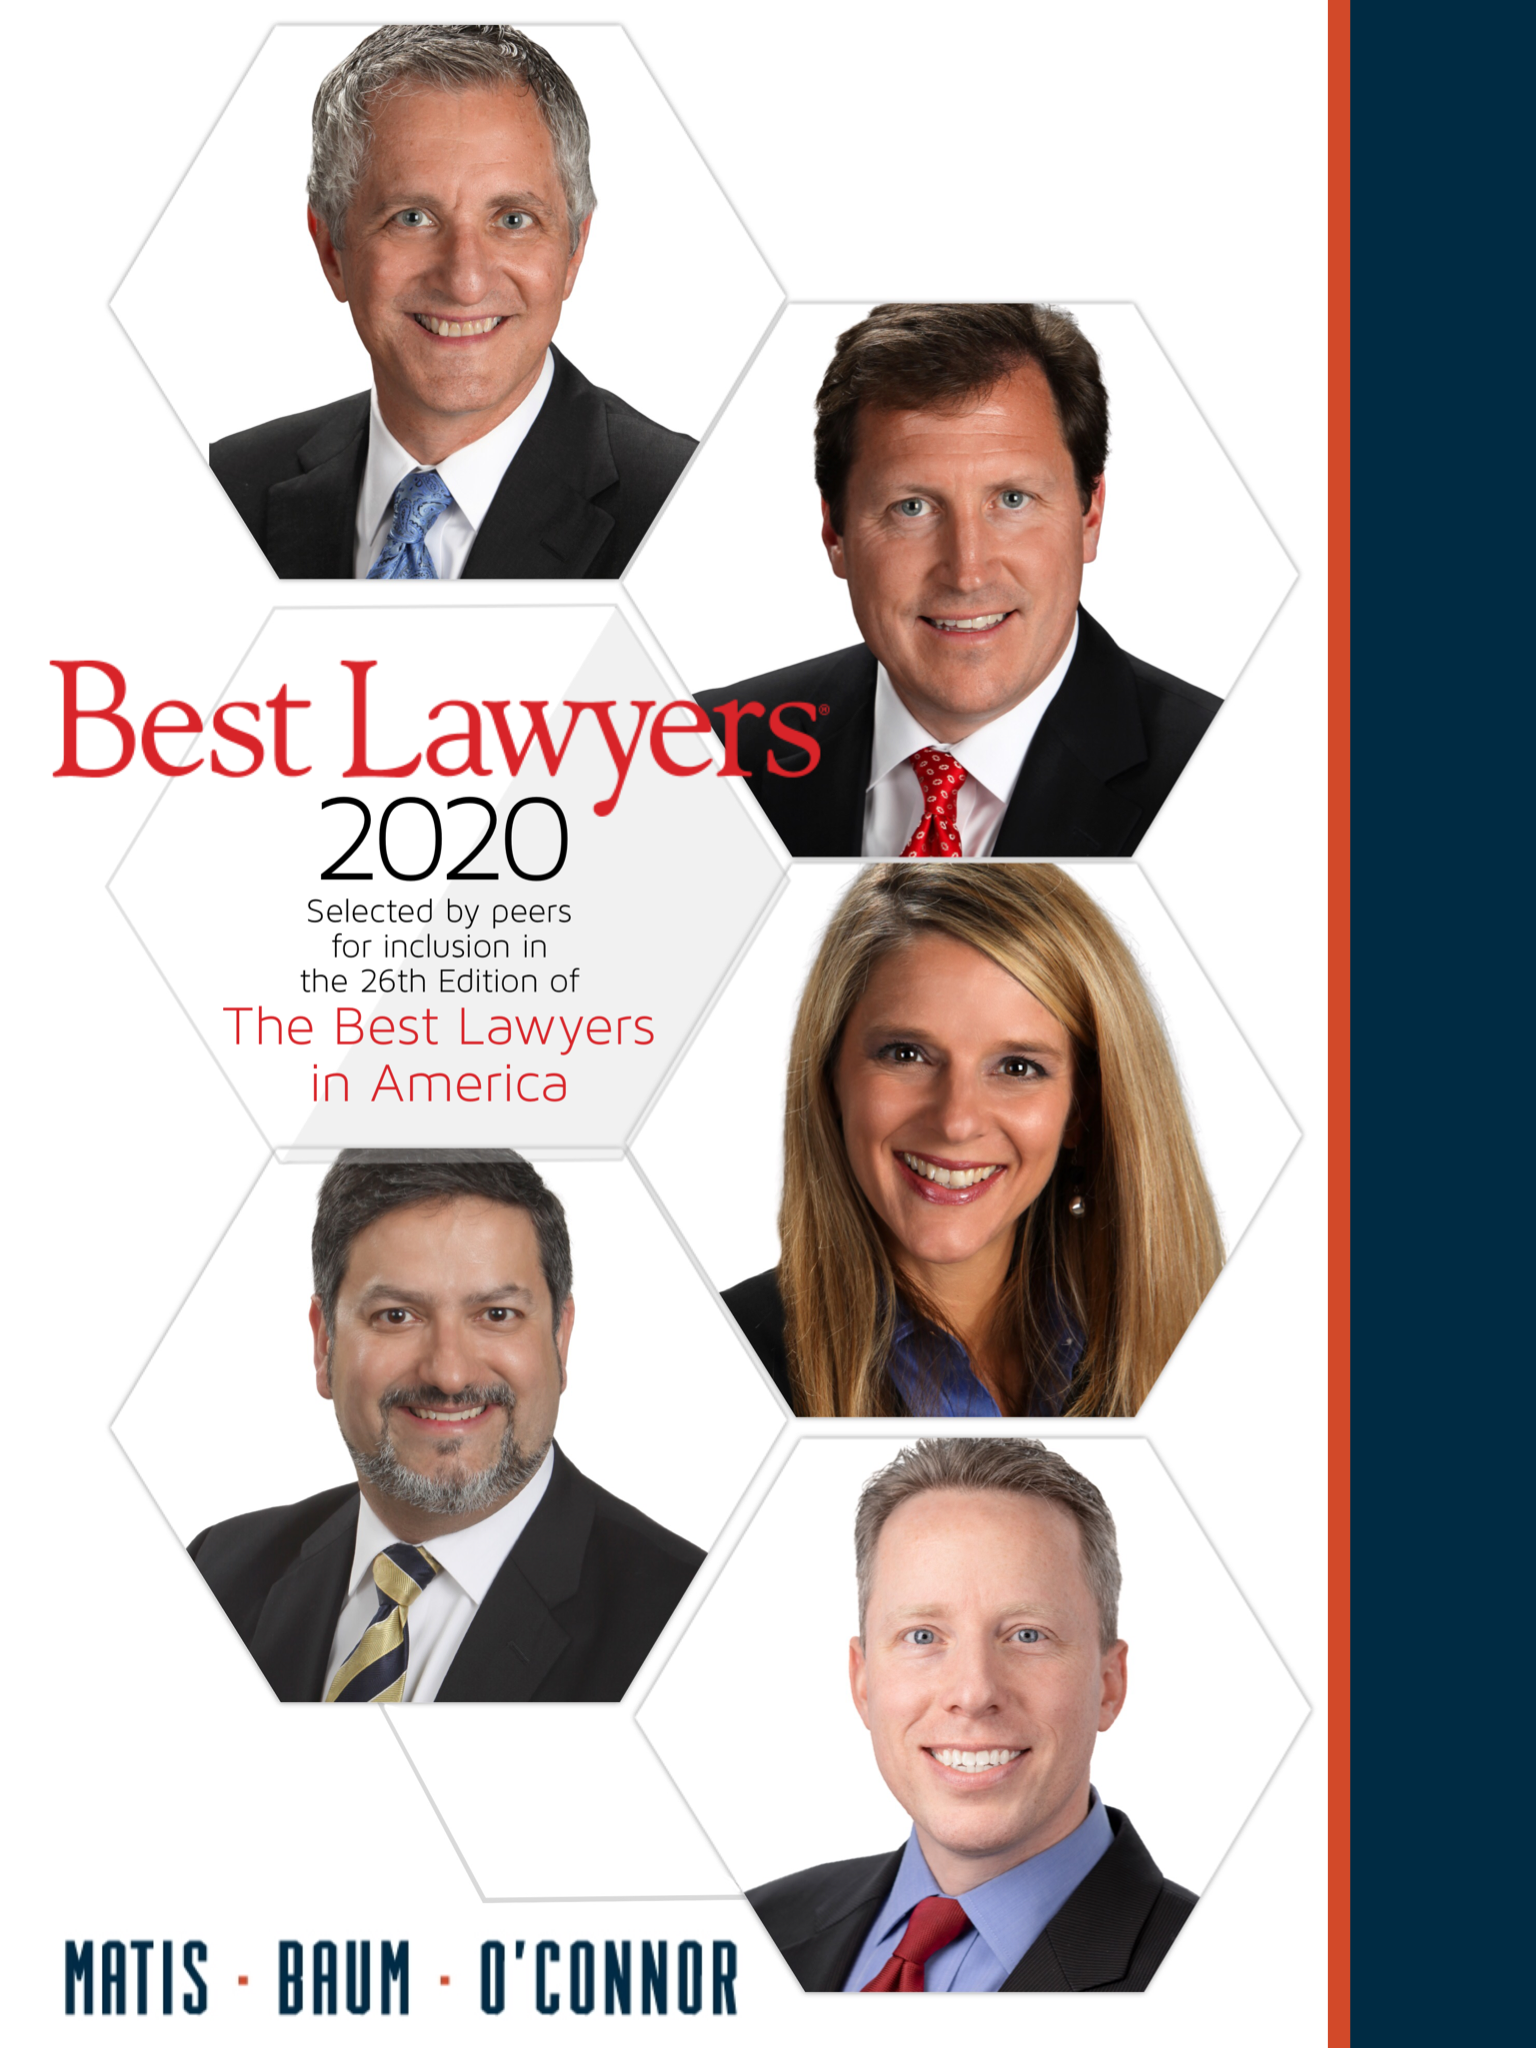 Five Matis Baum O’Connor Lawyers Named to 2020 The Best